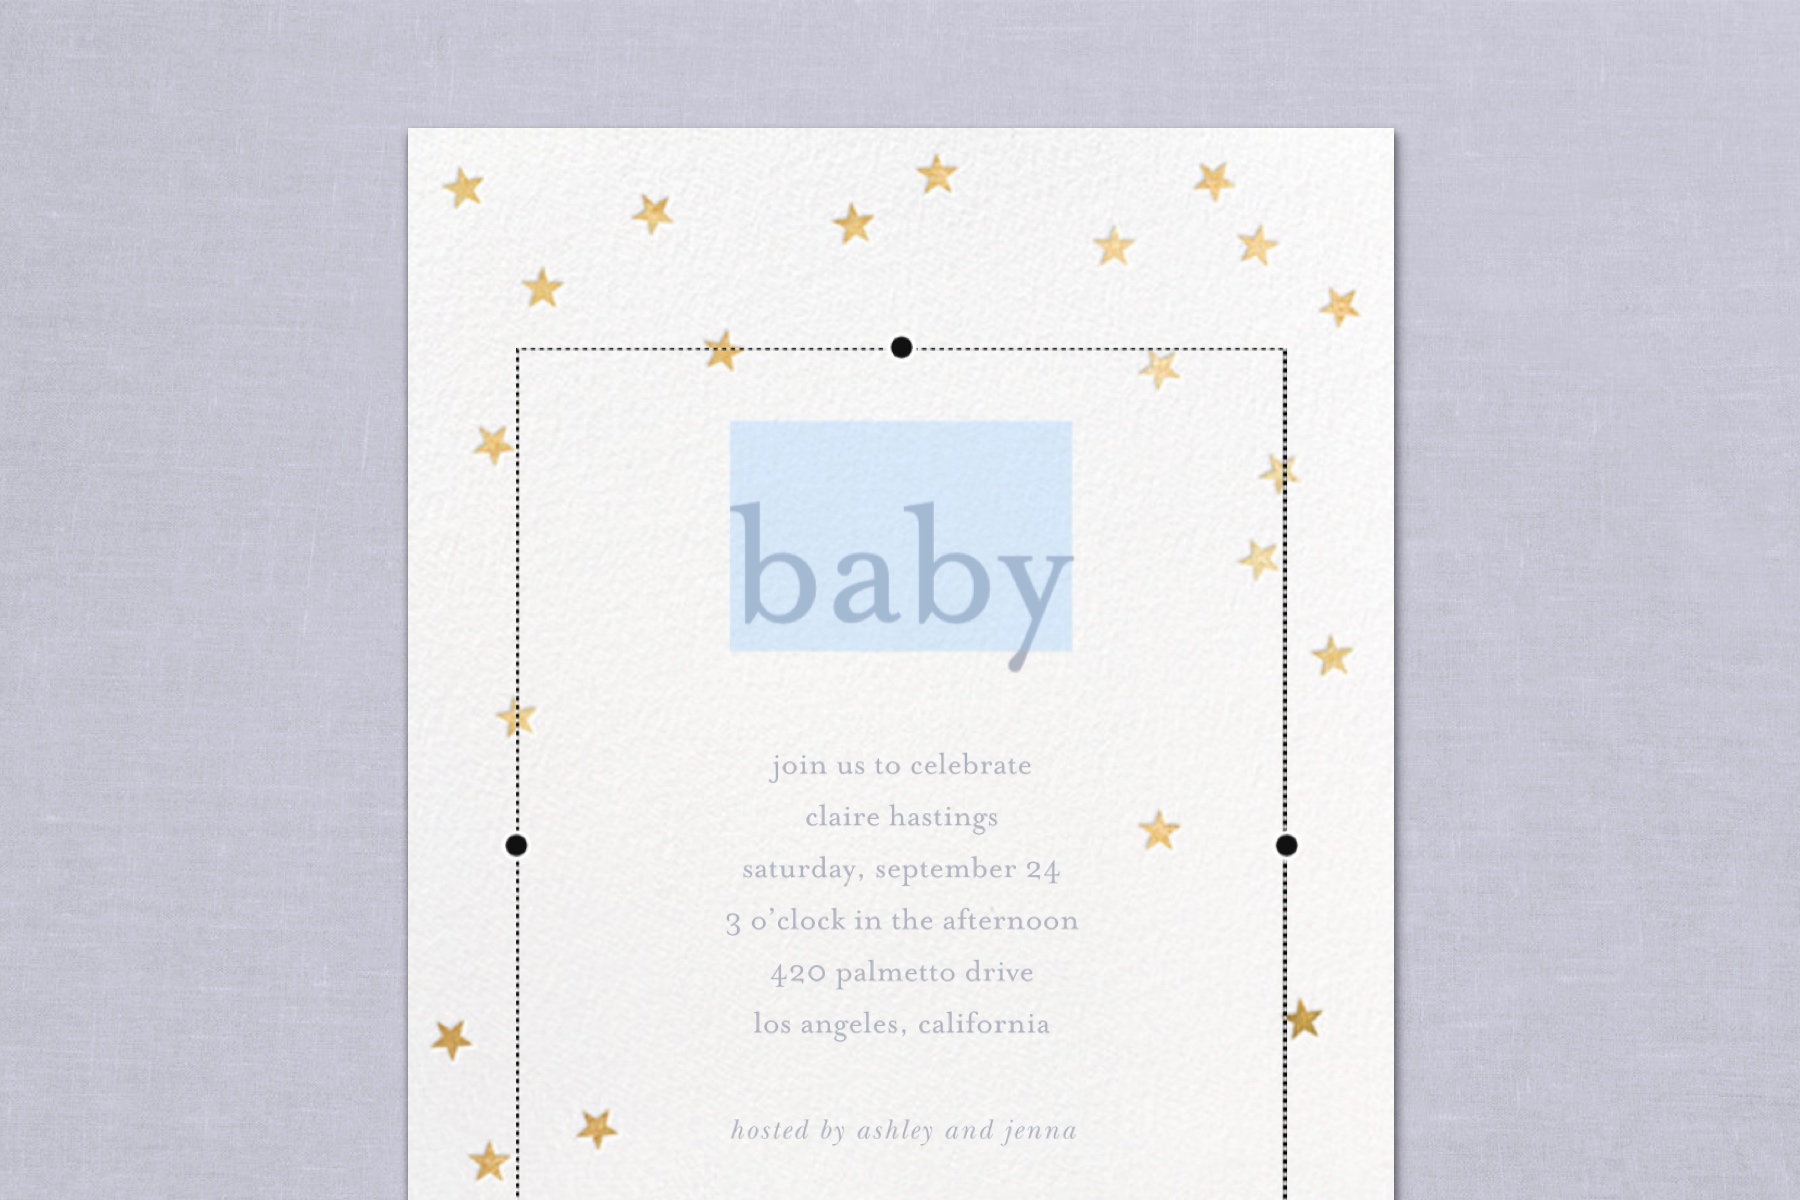 baby shower invitation wording featuring invitation with stars